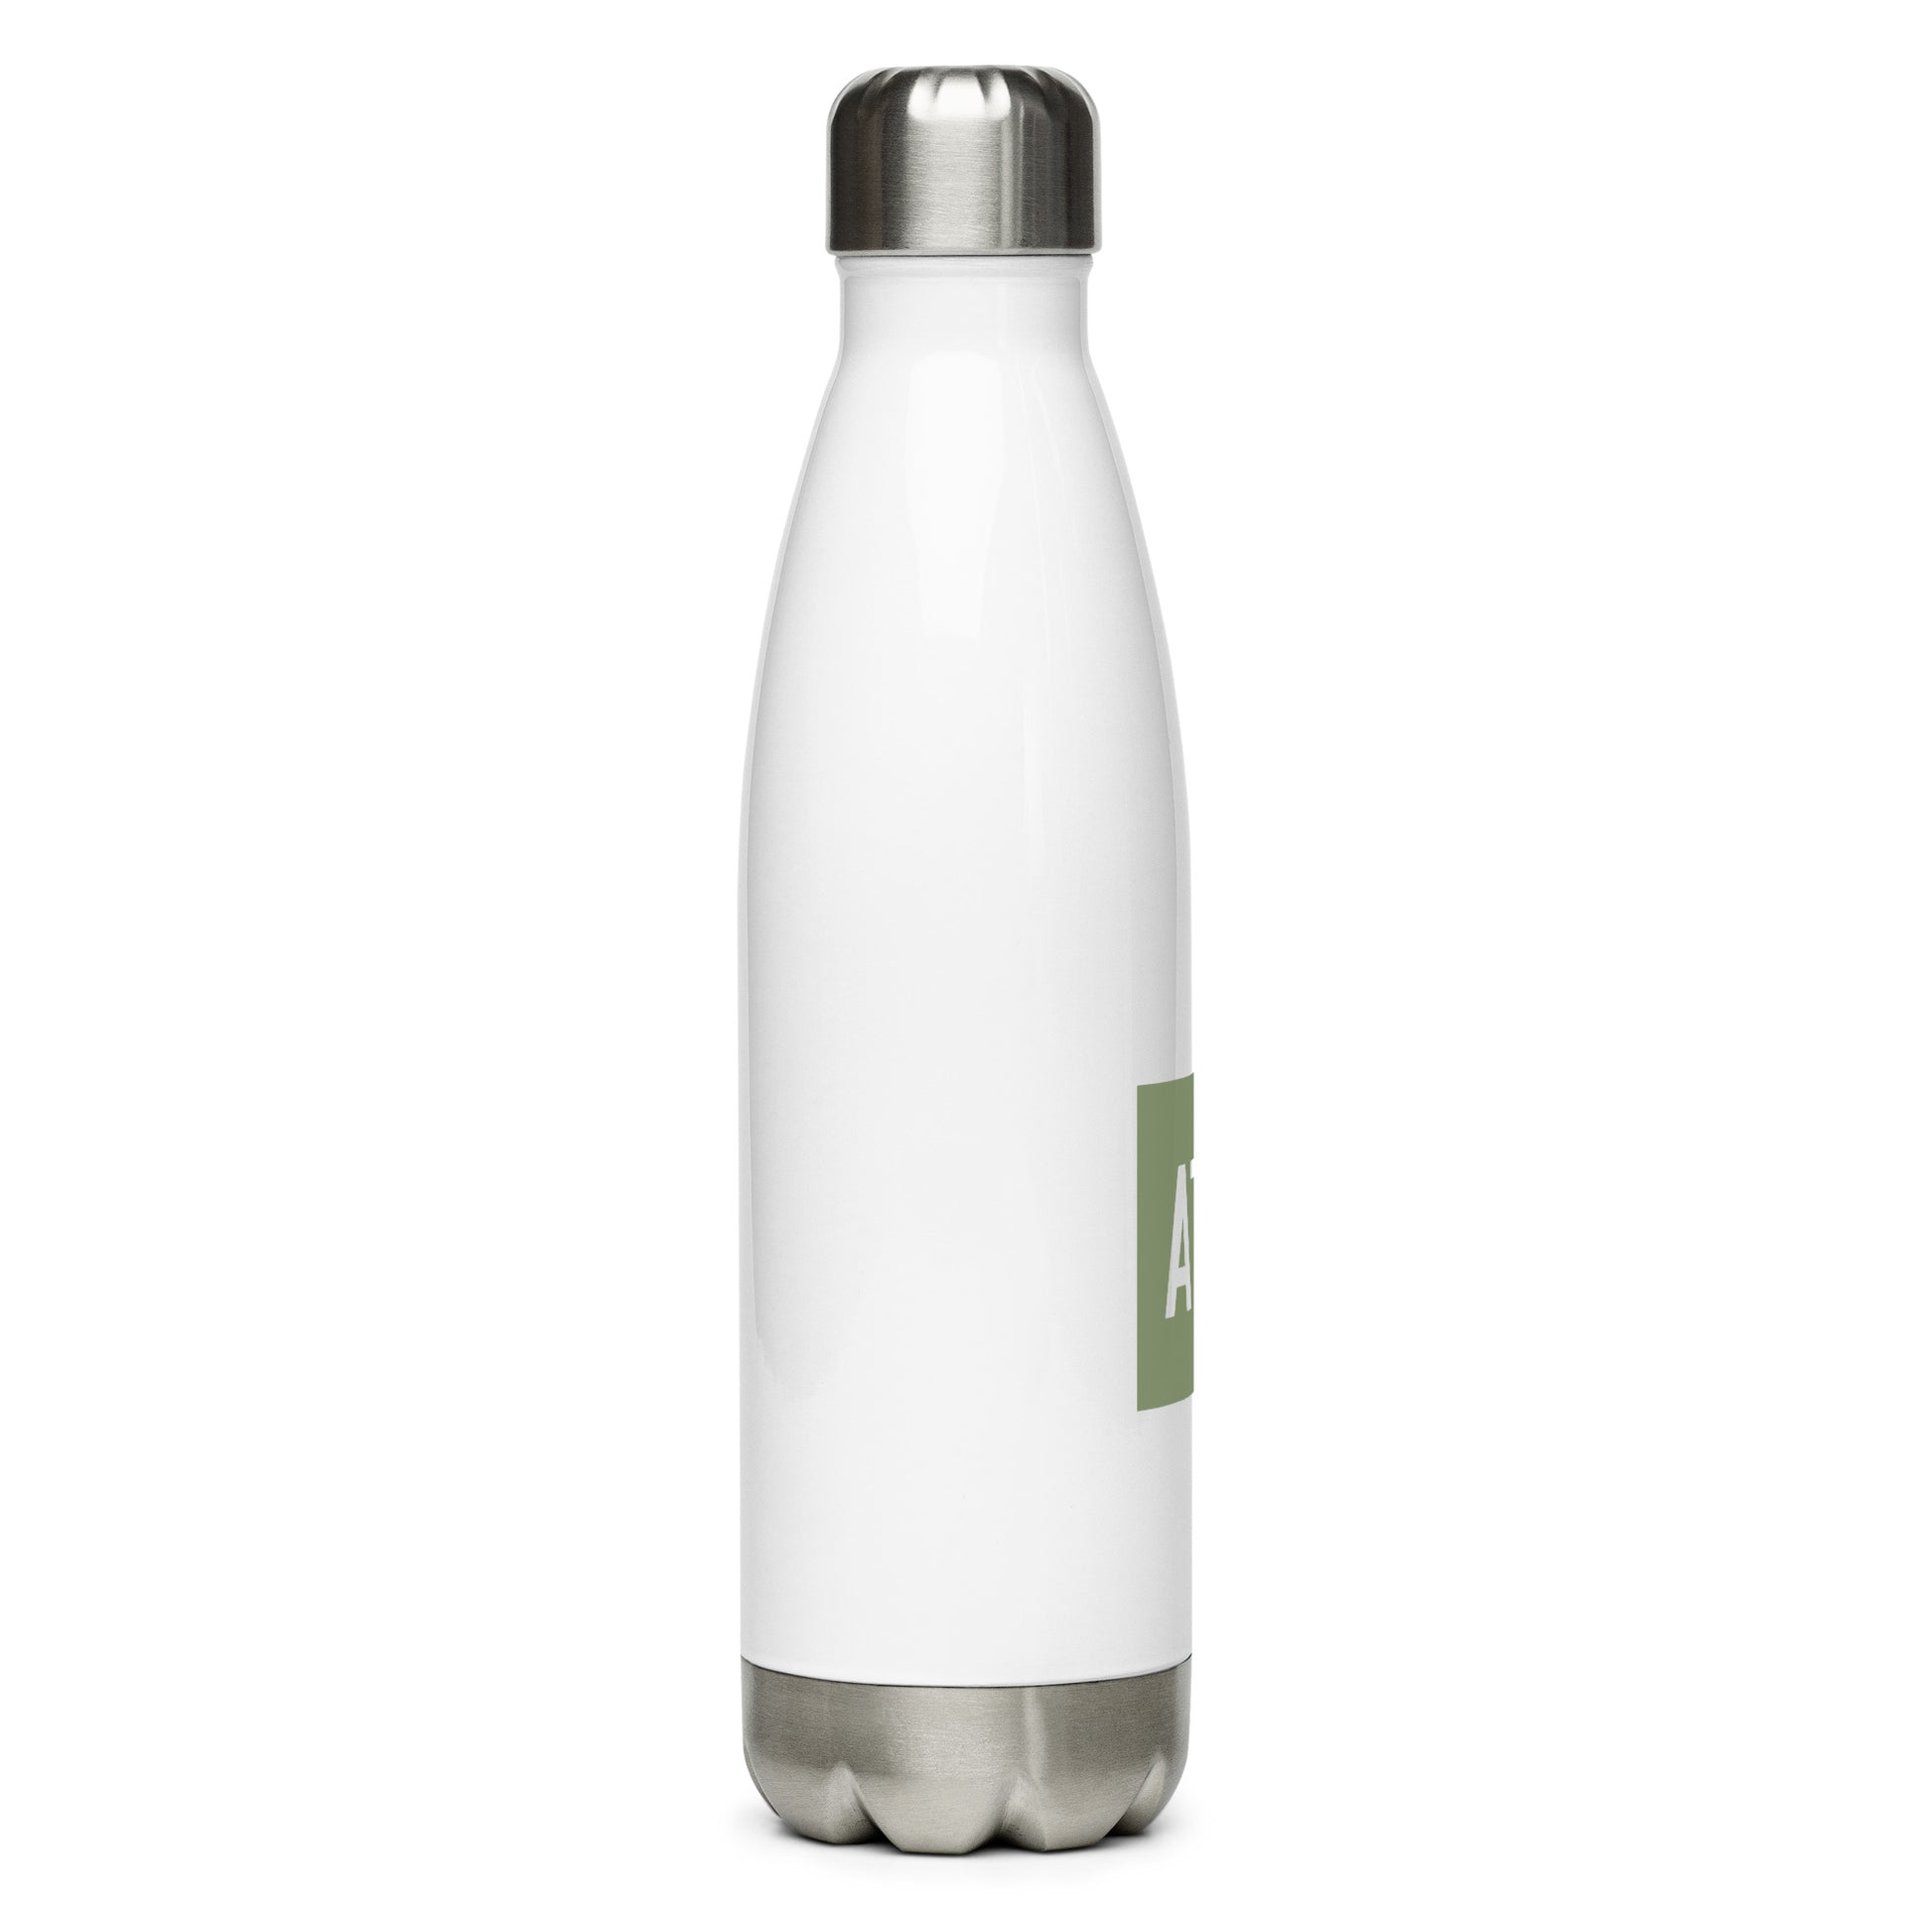 Aviation Gift Water Bottle - Camo Green • ATH Athens • YHM Designs - Image 07